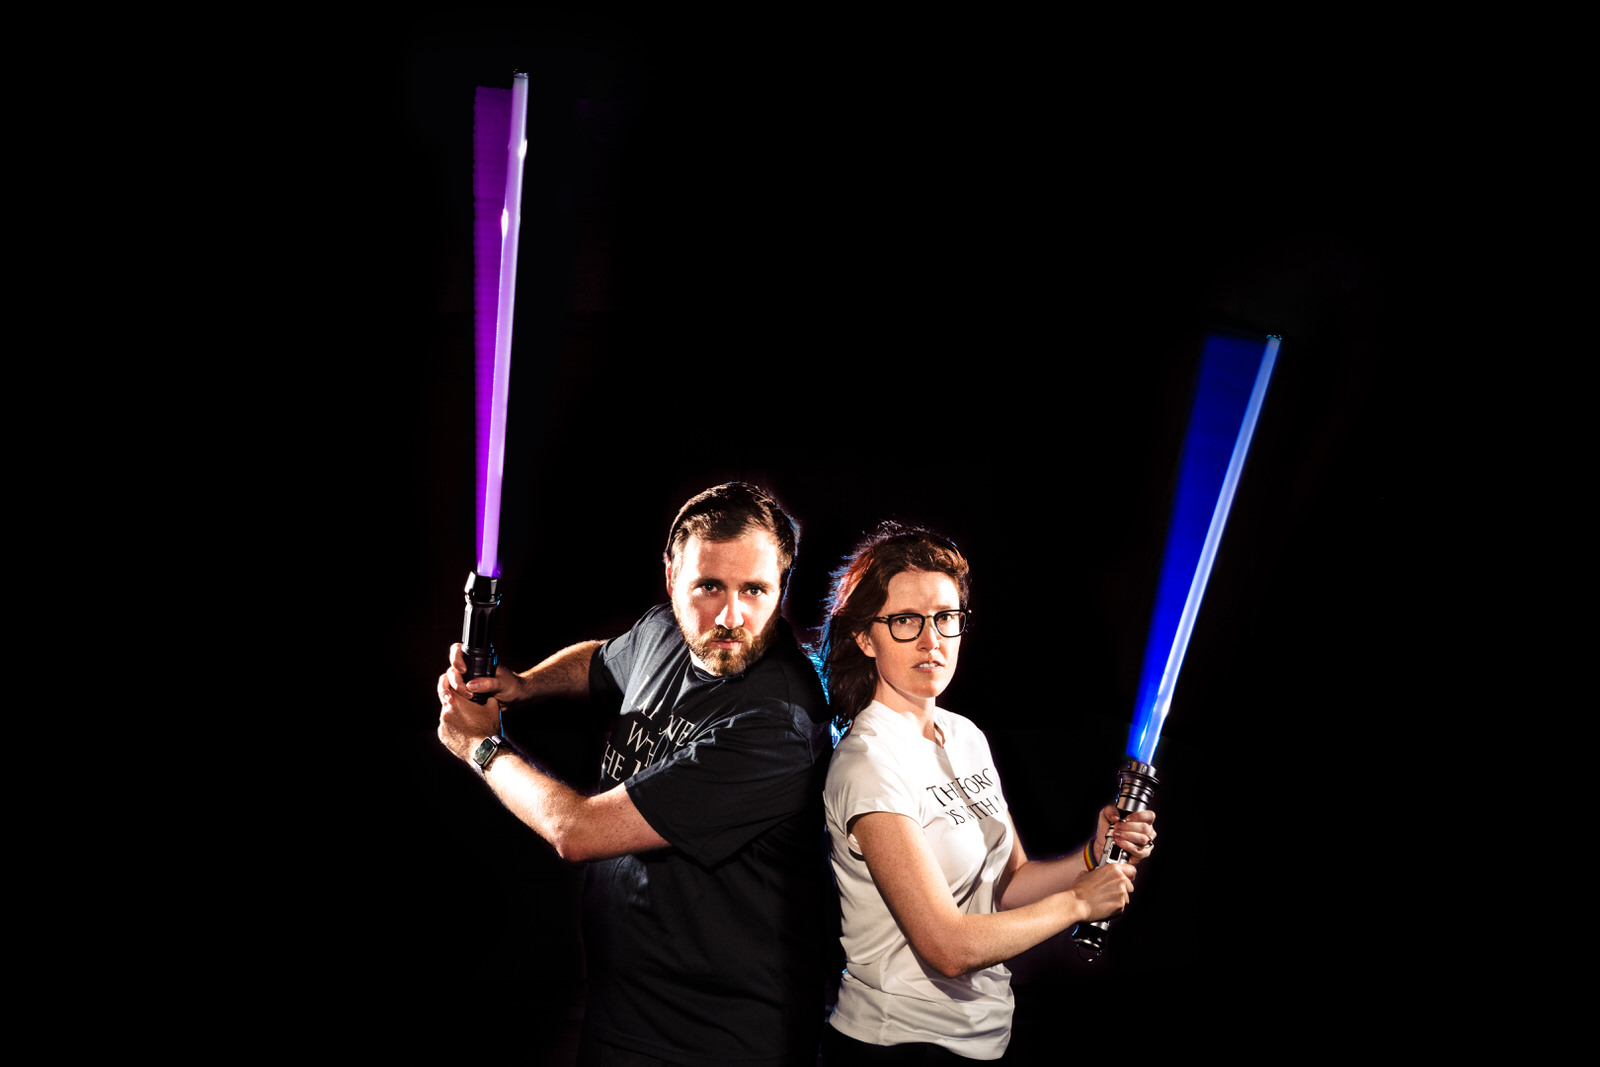 Nerdy wedding photographers pose with their light sabers